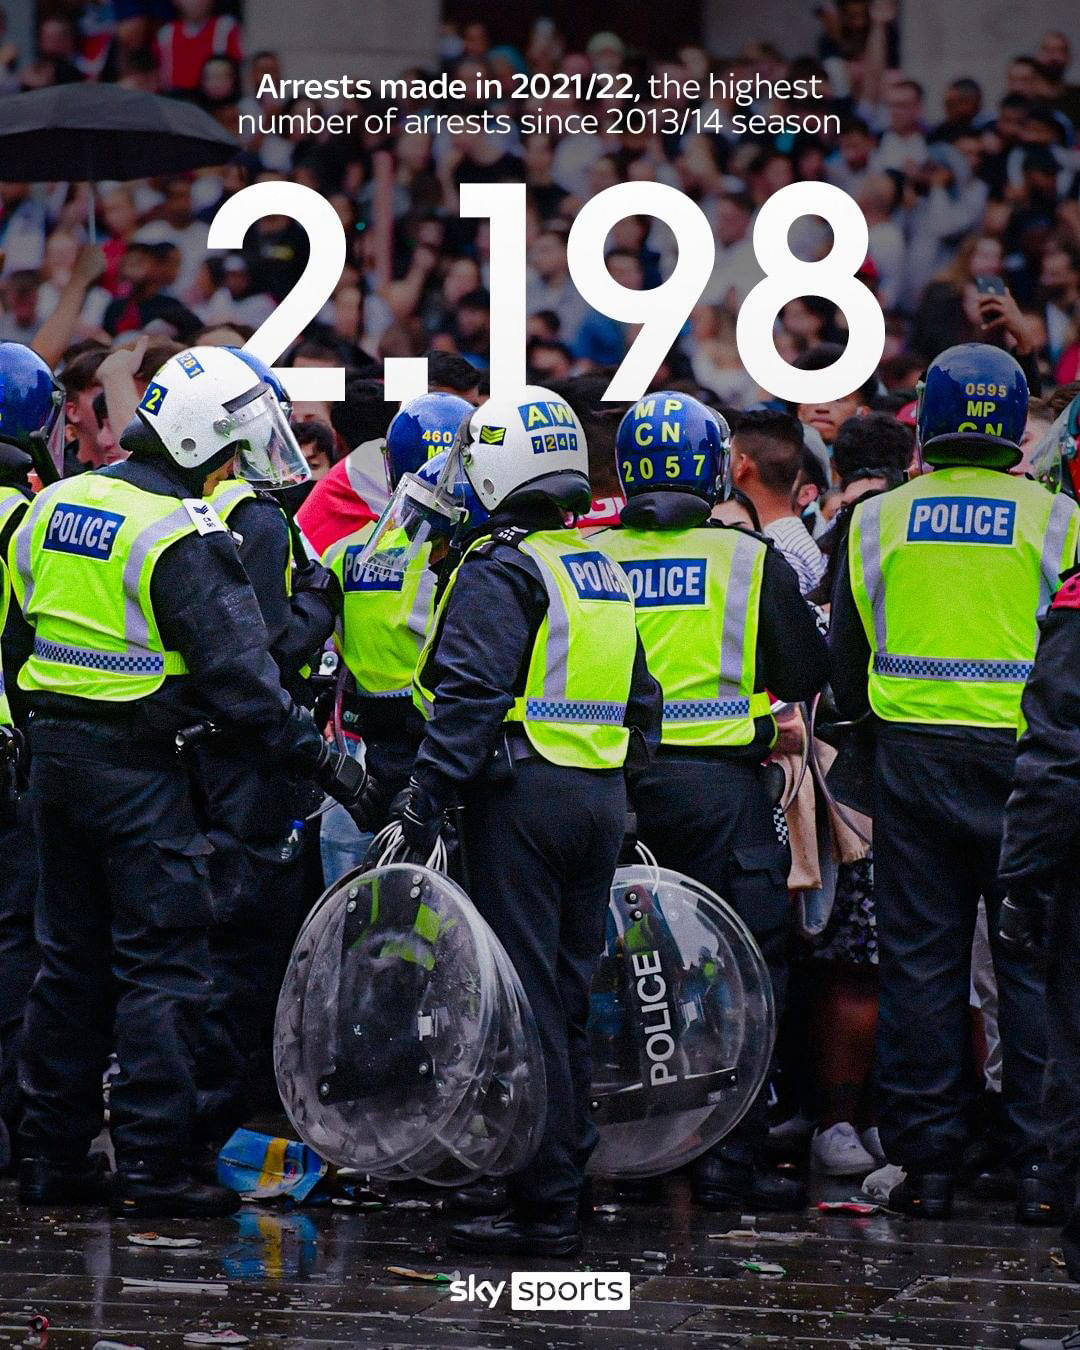 image  1 Sky Sports - Arrests at football matches in England and Wales are the highest in eight years, as the